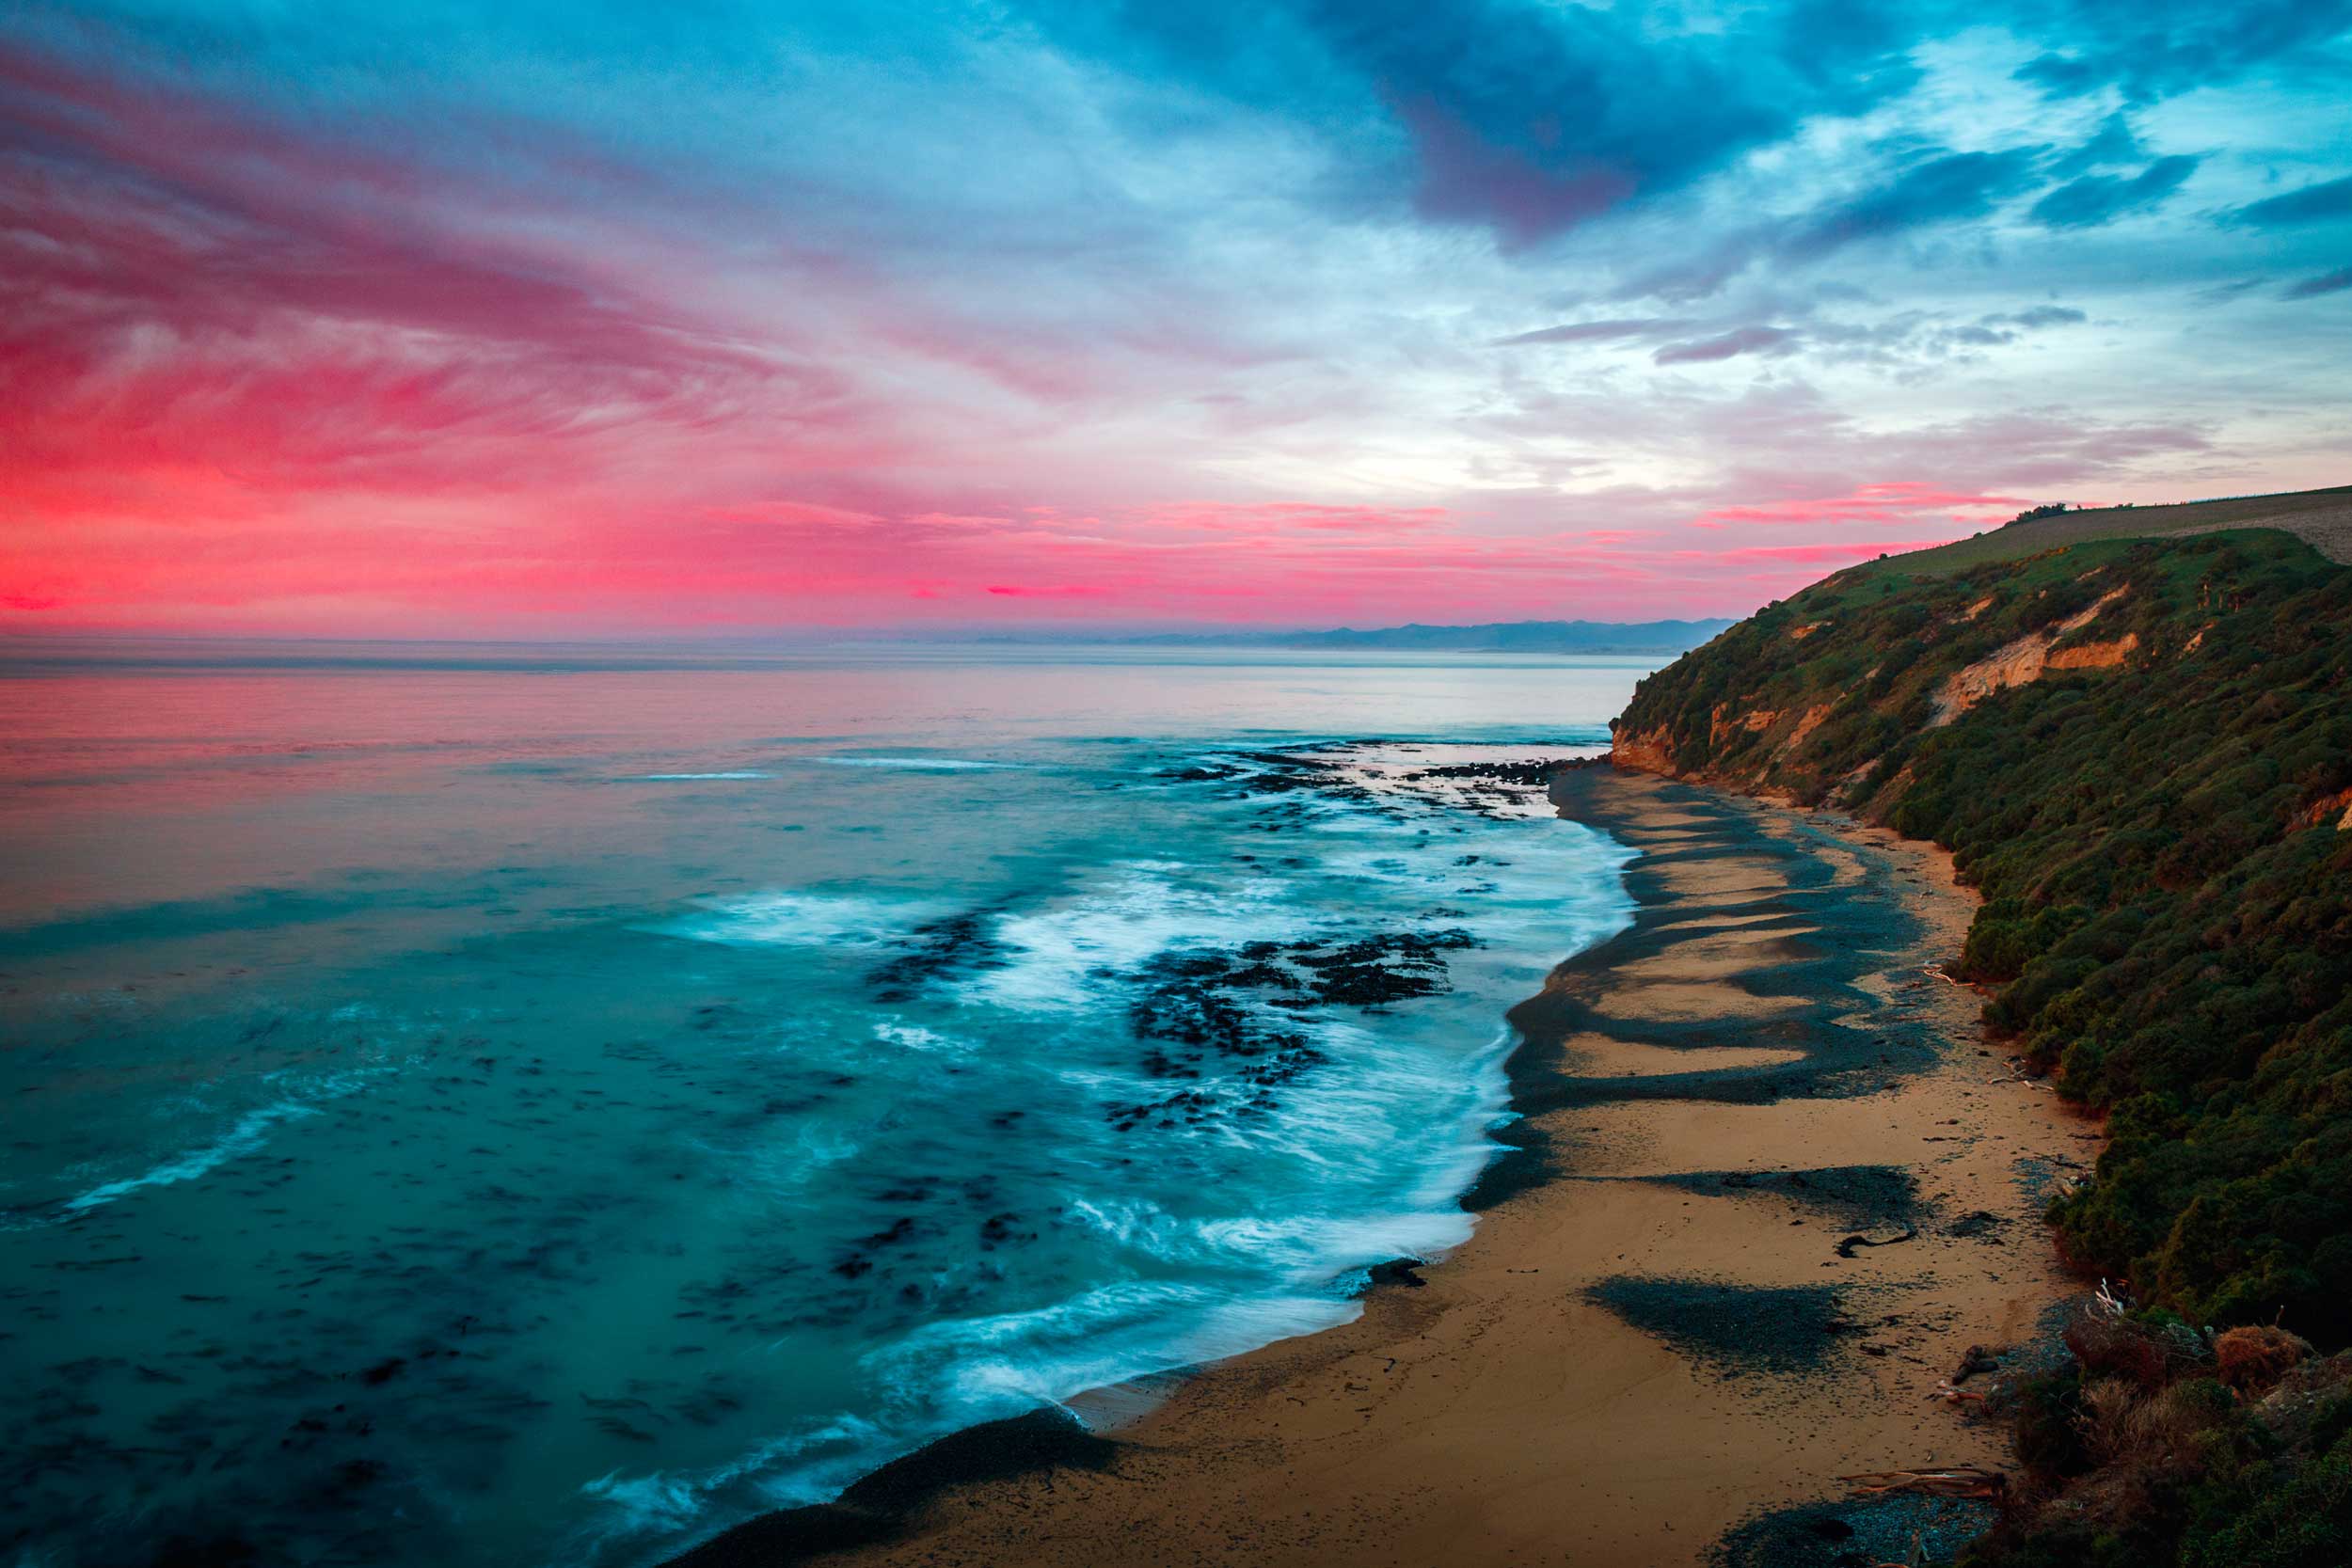 Sea lapping a sandy beach with a sunset red sky, New Zealand